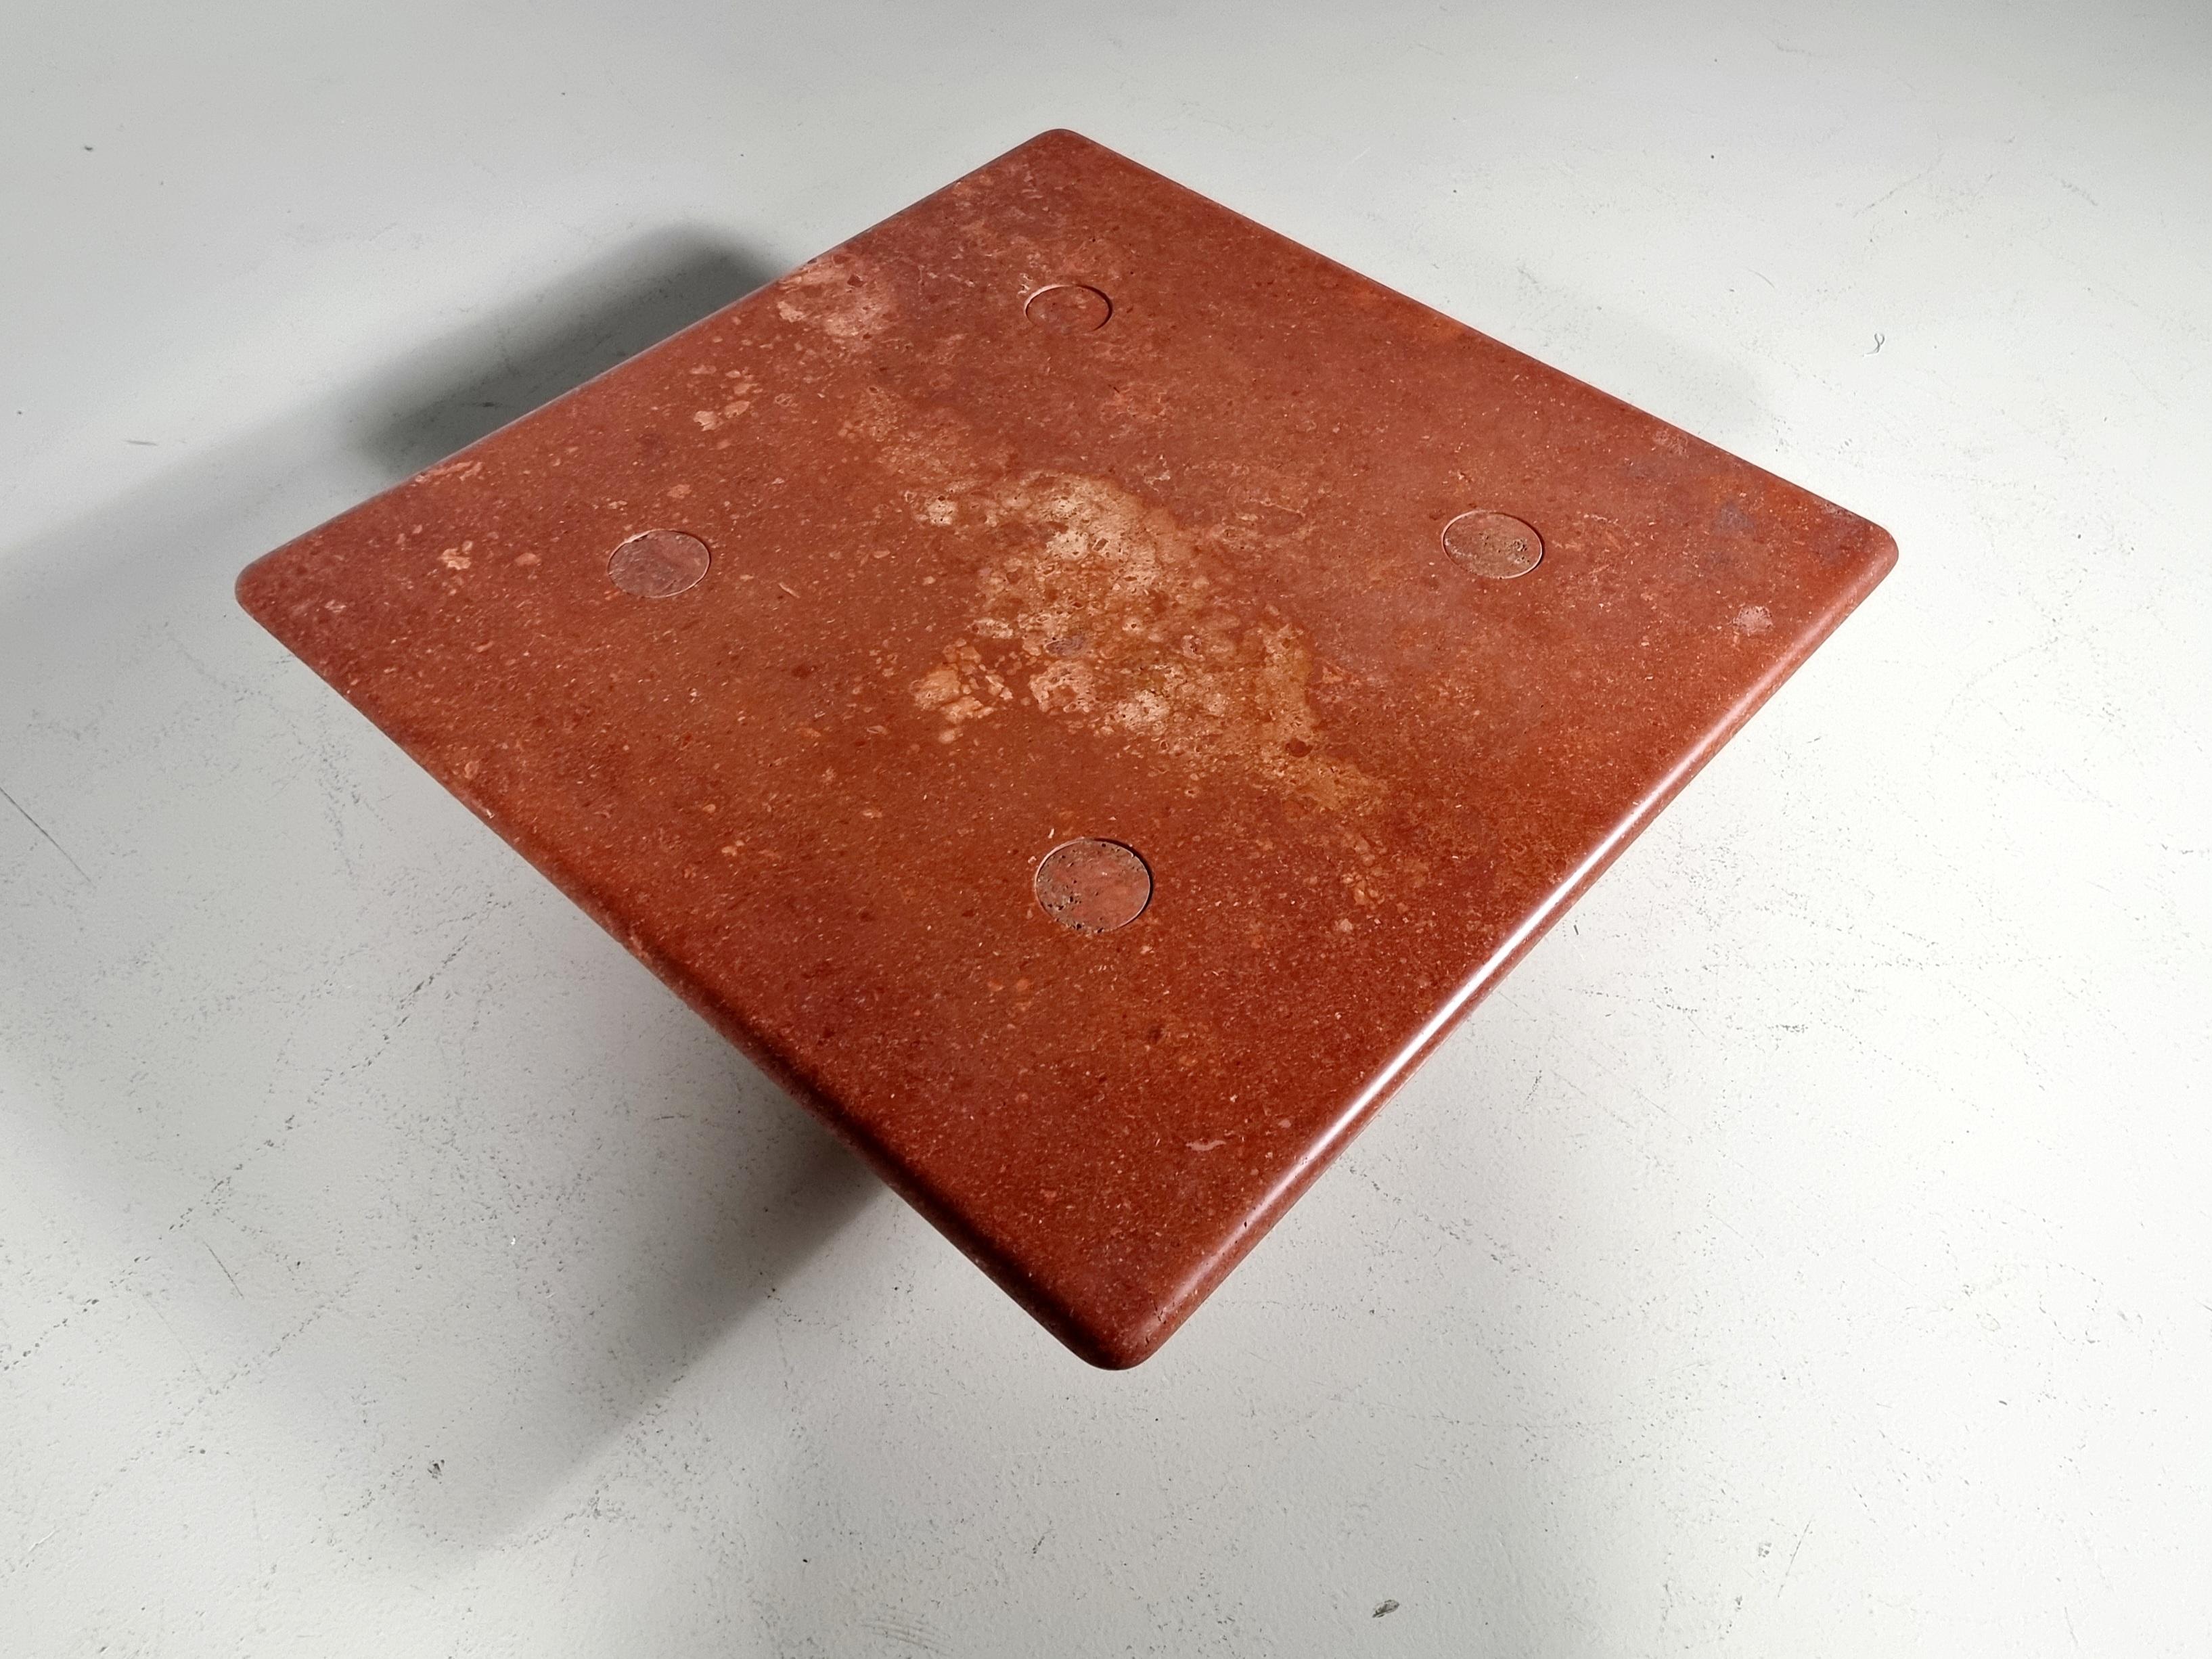 European Red travertine coffee table by Angelo Mangiarotti, Italy, 1970s